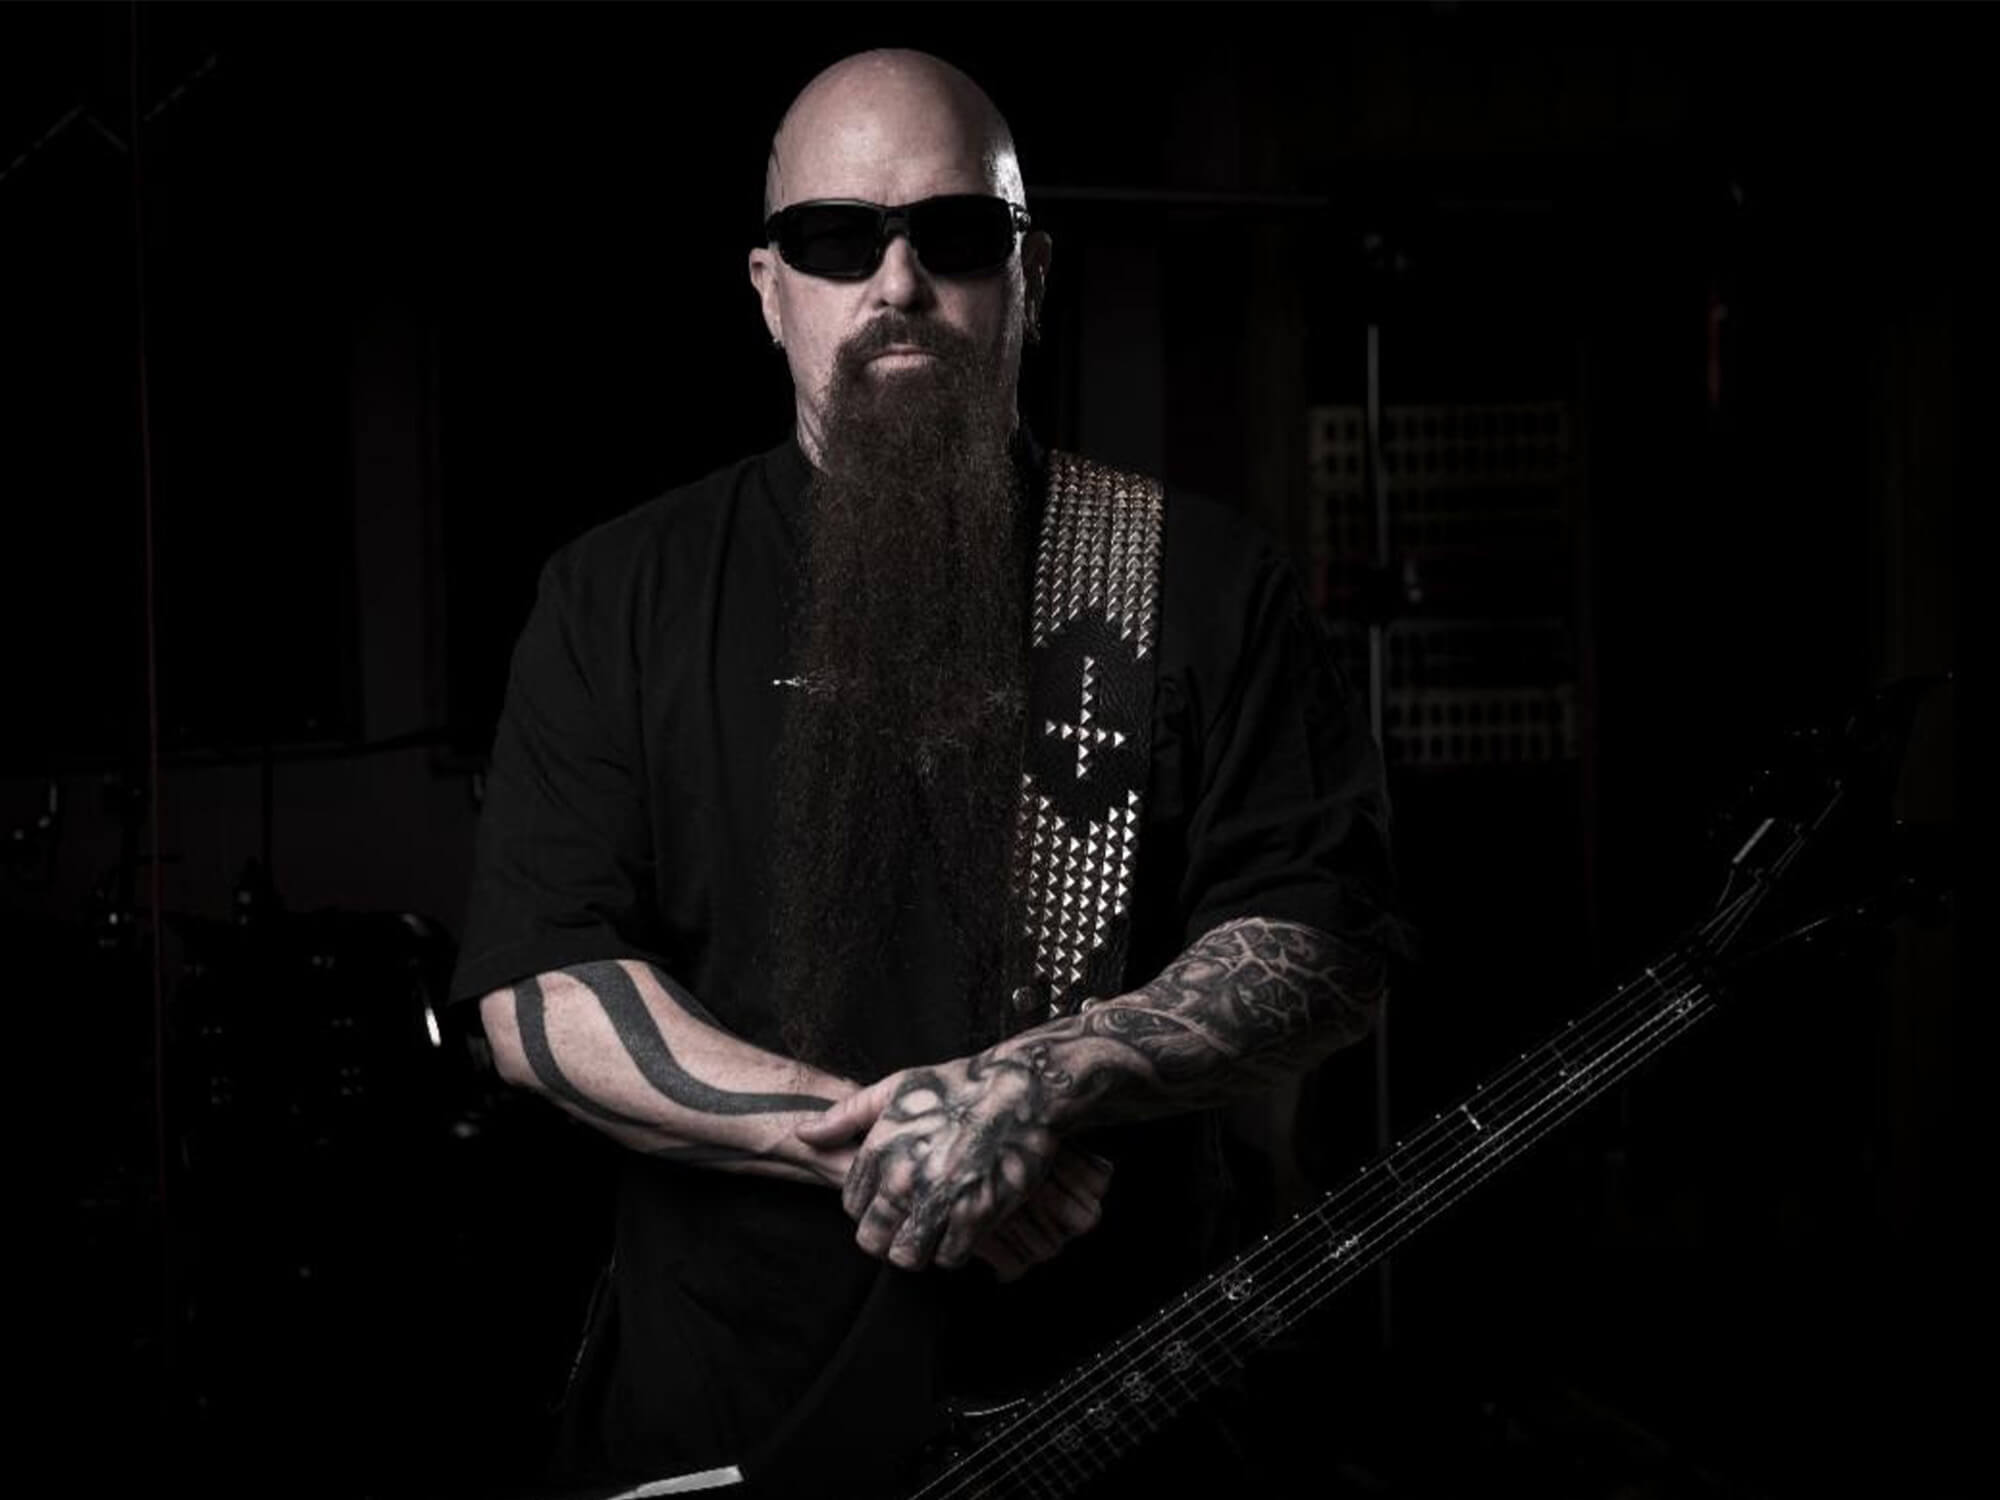 Kerry King standing with a straight expression. He wears all black and stands in front of a black backdrop. He has on shades and wears his guitar on a strap.